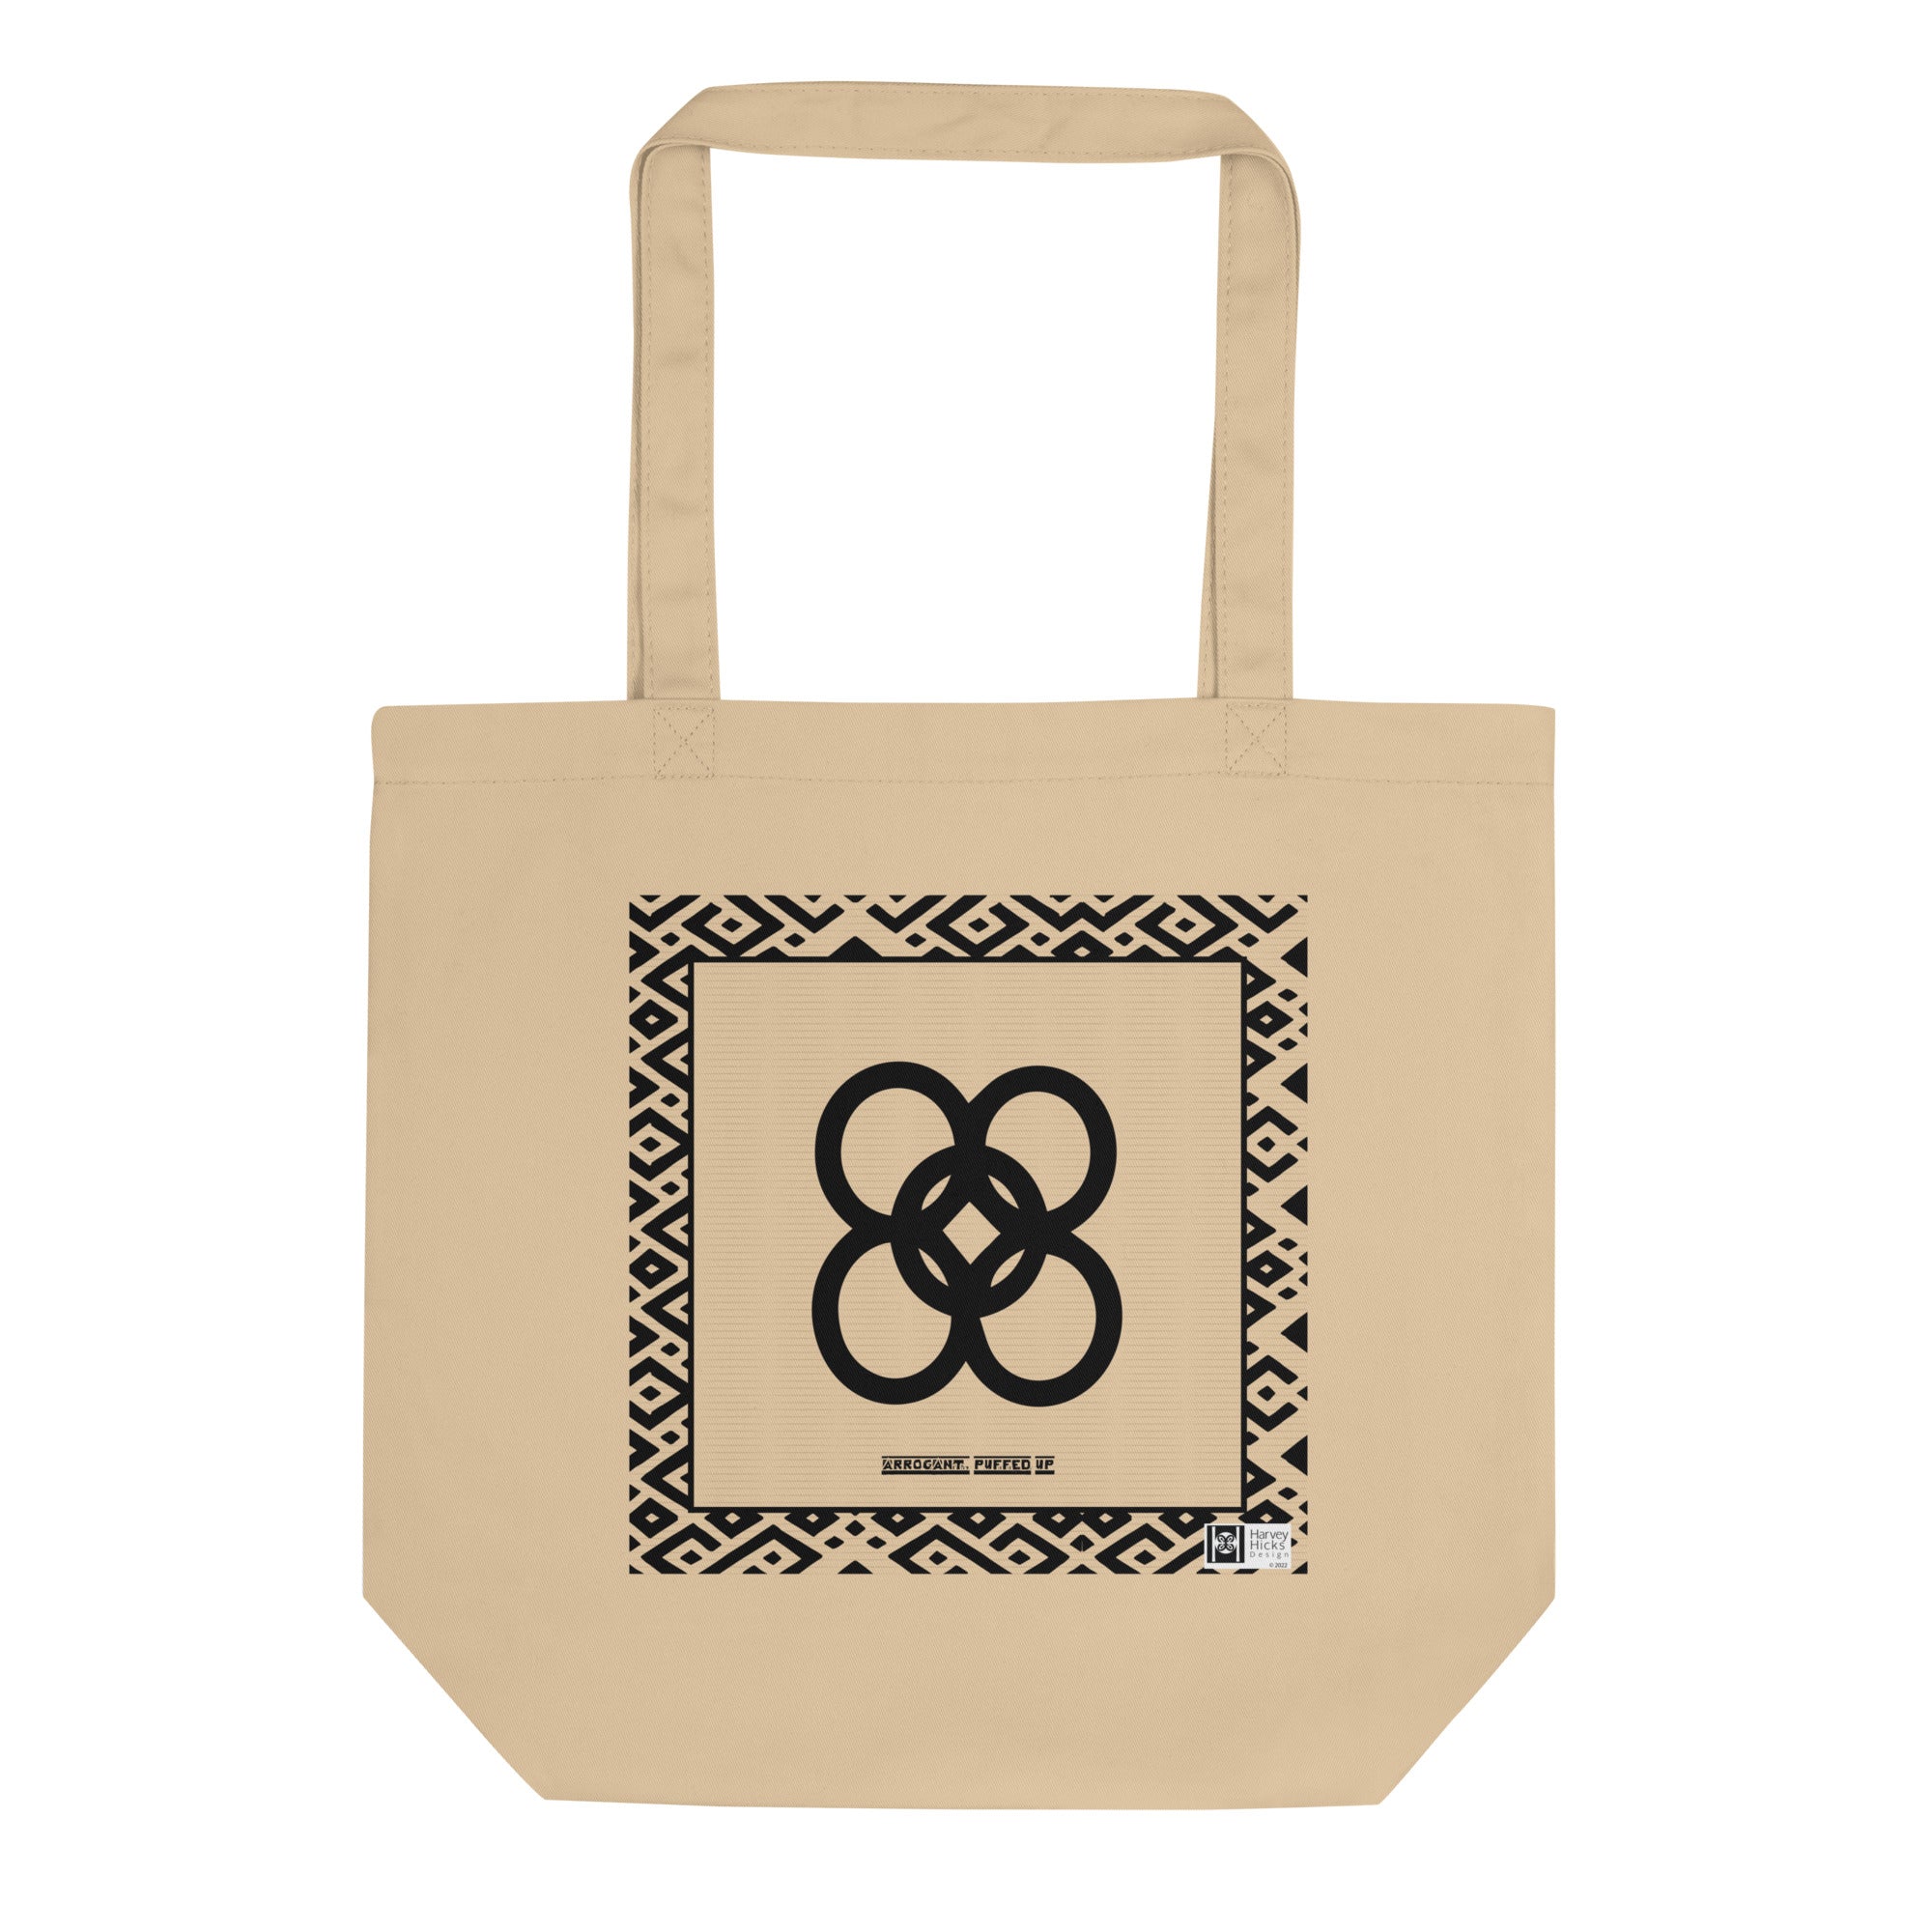 100% cotton Eco Tote Bag, featuring the Adinkra symbol for arrogance